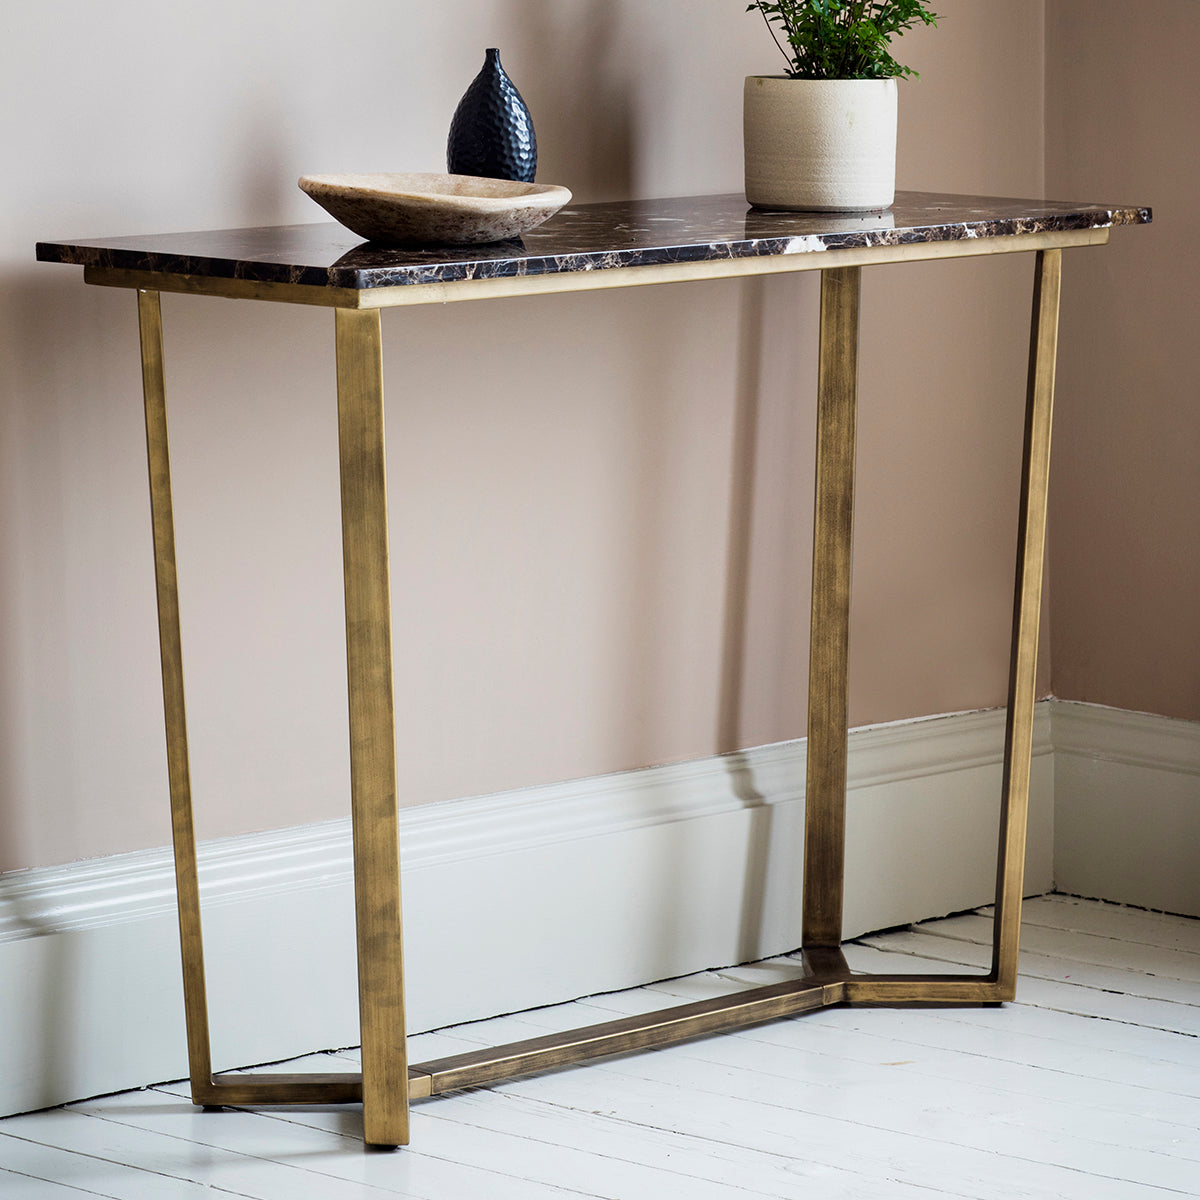 A Moreleigh Console Table Marble with a gold frame and marble top, perfect for home furniture and interior decor.